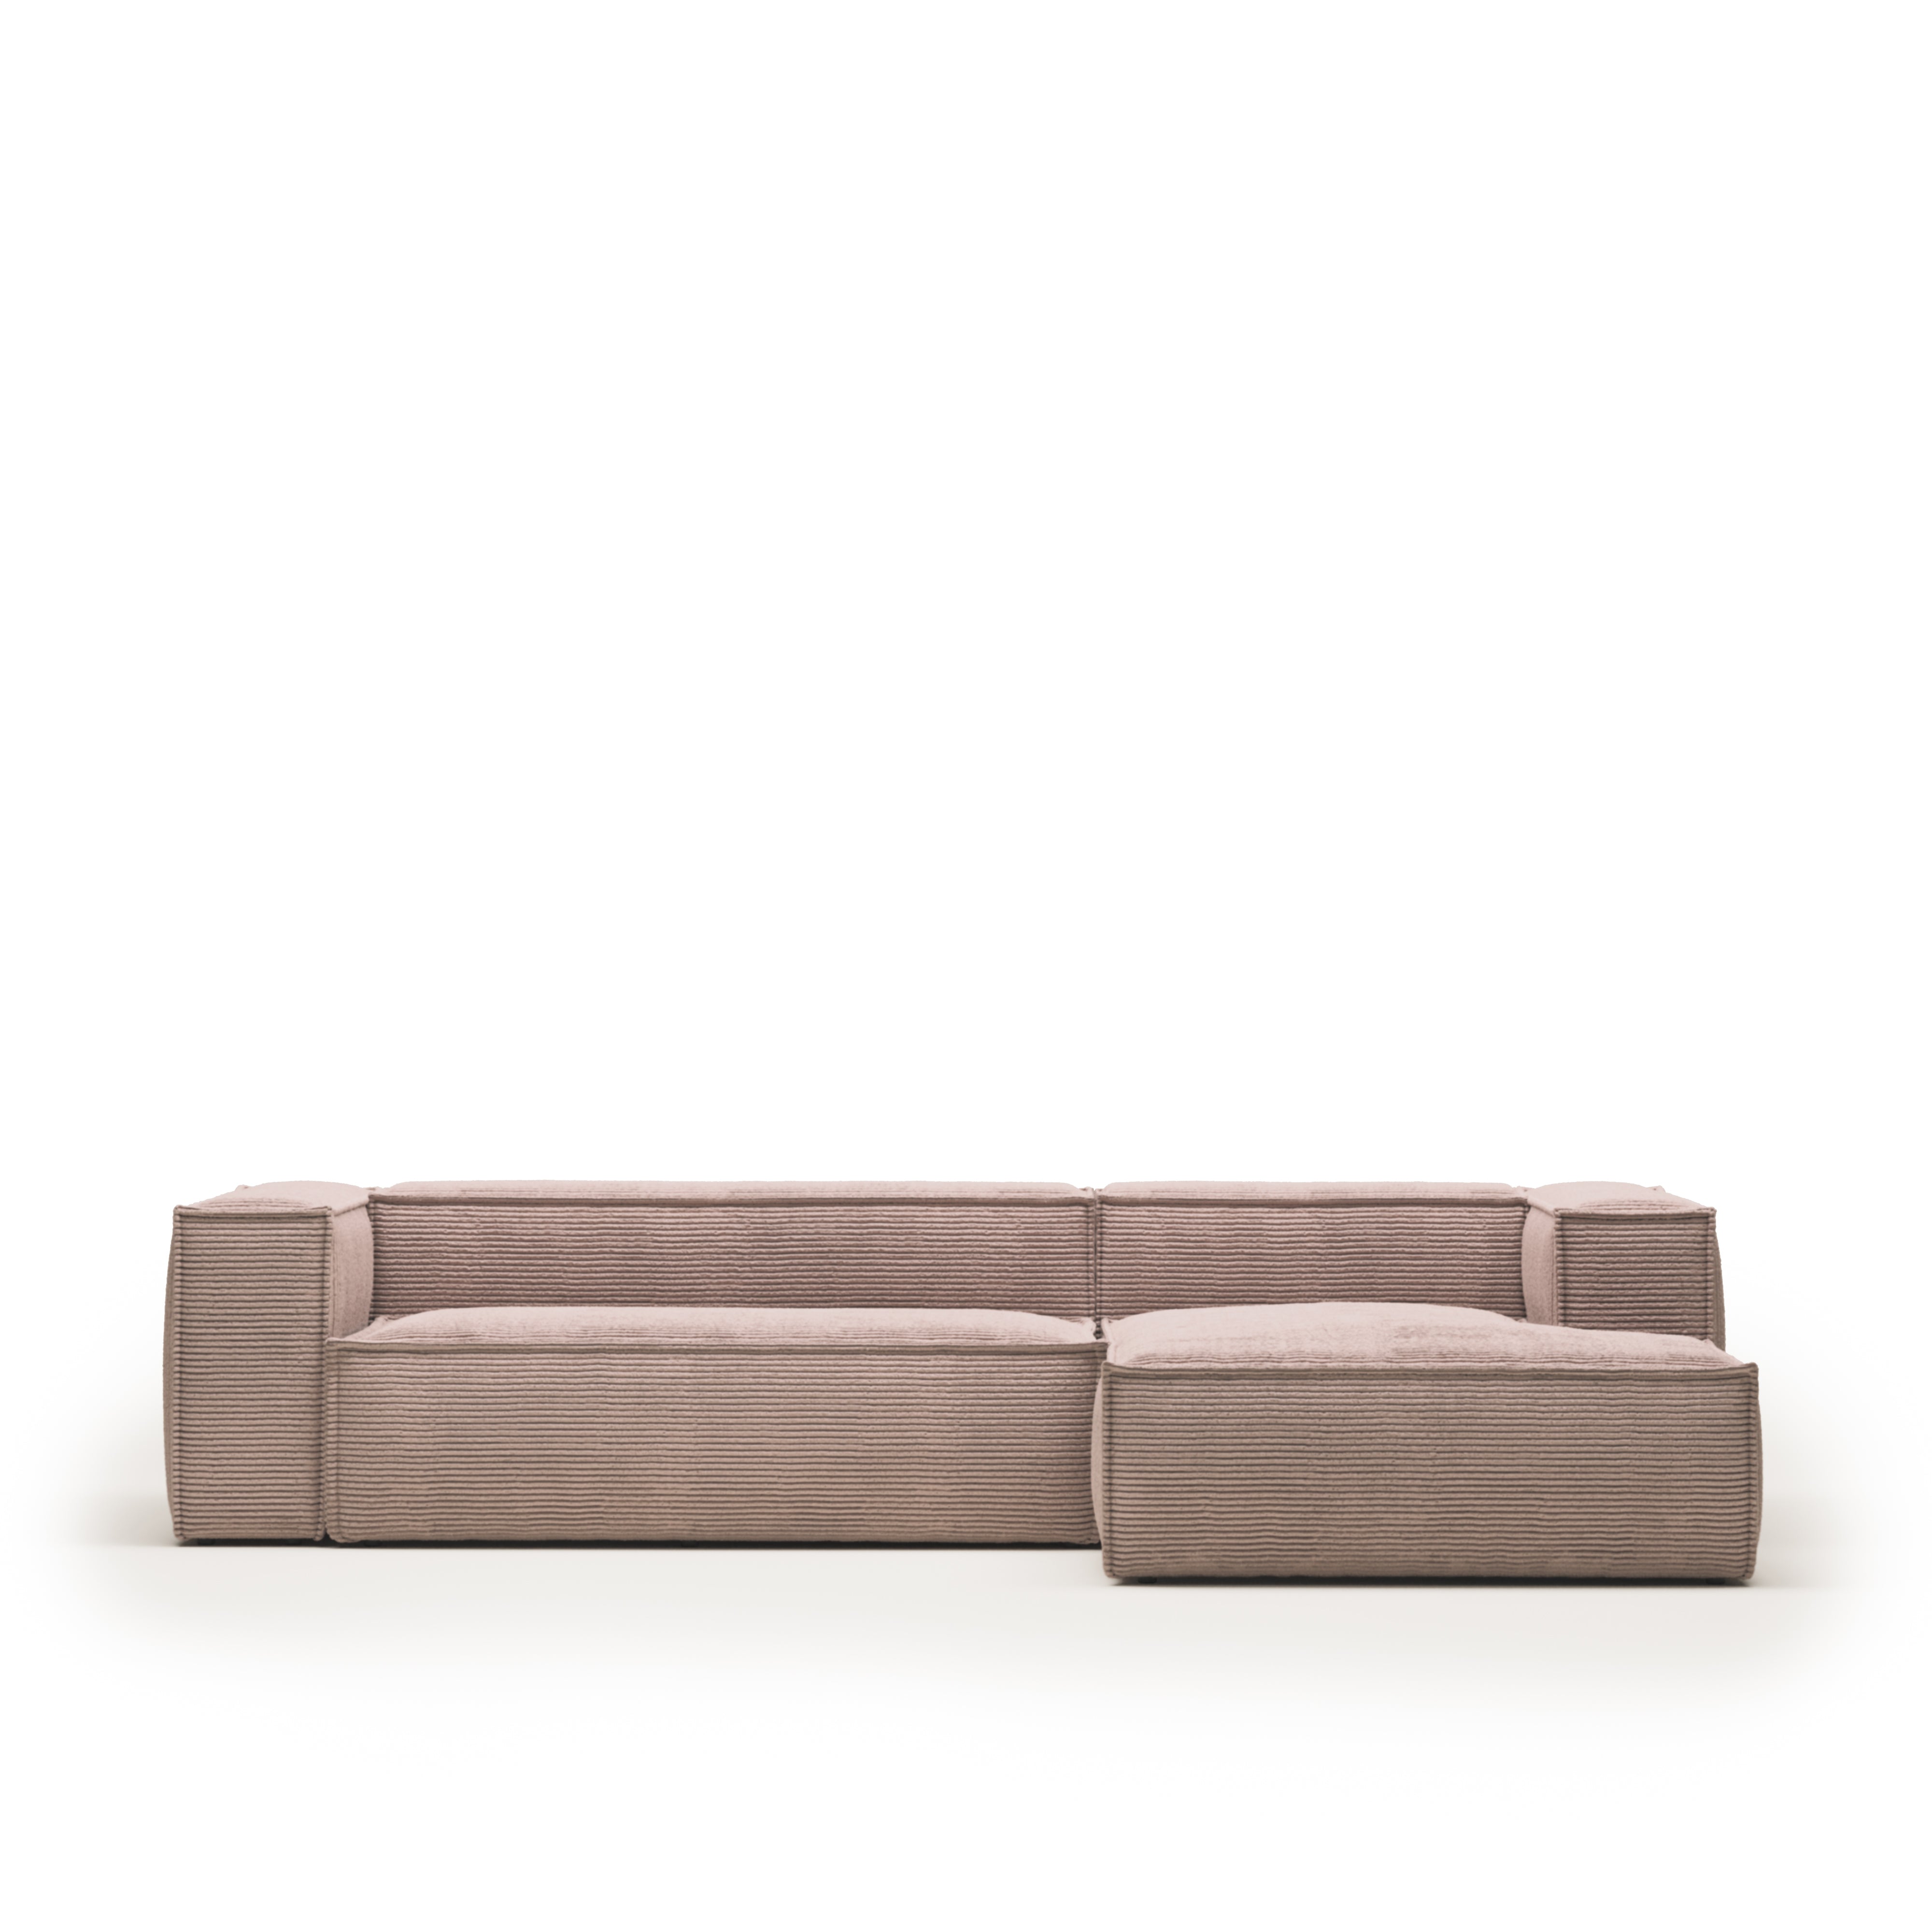 Blok 3-person sofa with chaise longue on the right in pink corduroy, 300 cm